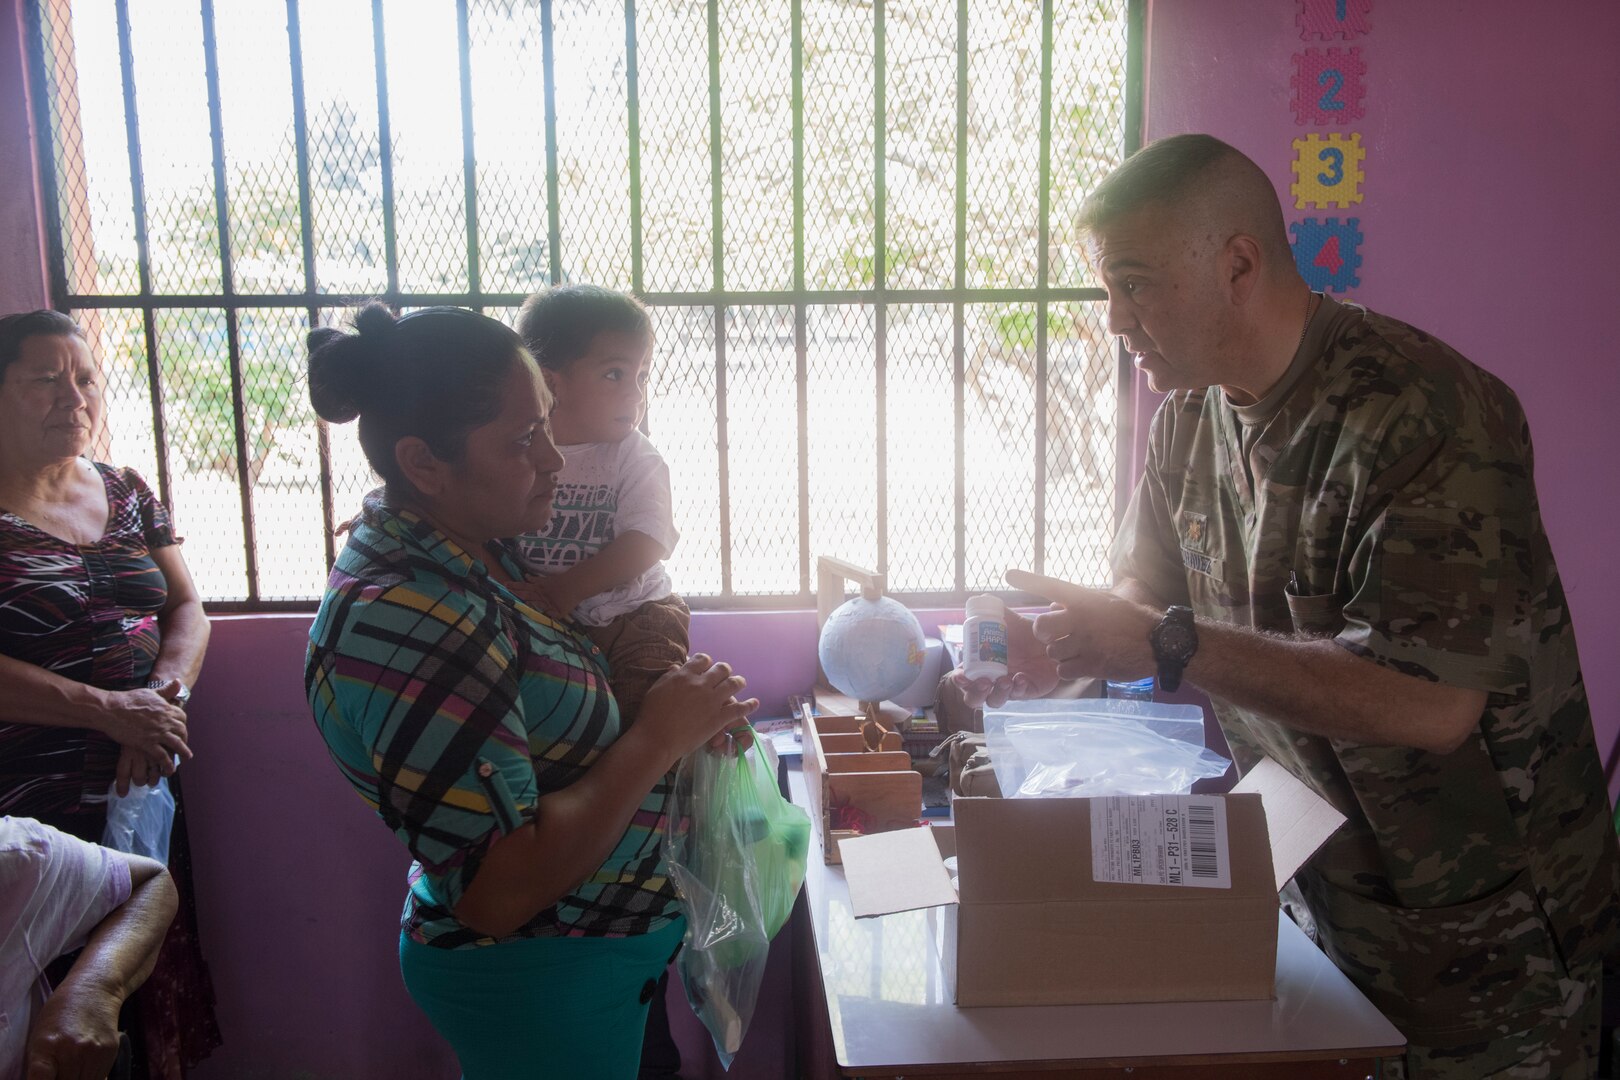 U.S. Army Maj. Jorge Chavez, Joint Task Force – Bravo Medical Element public  health nurse, hands vitamins to a Honduran citizen during a Medical Readiness Training Exercise (MEDRETE), May 9, 2019, in El Paraiso, Honduras. Members of JTF-B partnered with the Honduran Military and Ministry of Health to provide health care services for more than 1,300 Honduran citizens reaching a third of the citizens in the towns of Argelia, Santa Maria and Las Dificultades in the El Paraiso Department. The goal of the mission was to provide the medical staff training in their areas of expertise as well as strengthen partnerships with the Honduran allies. (U.S. Air Force photo by Staff Sgt. Eric Summers Jr.)